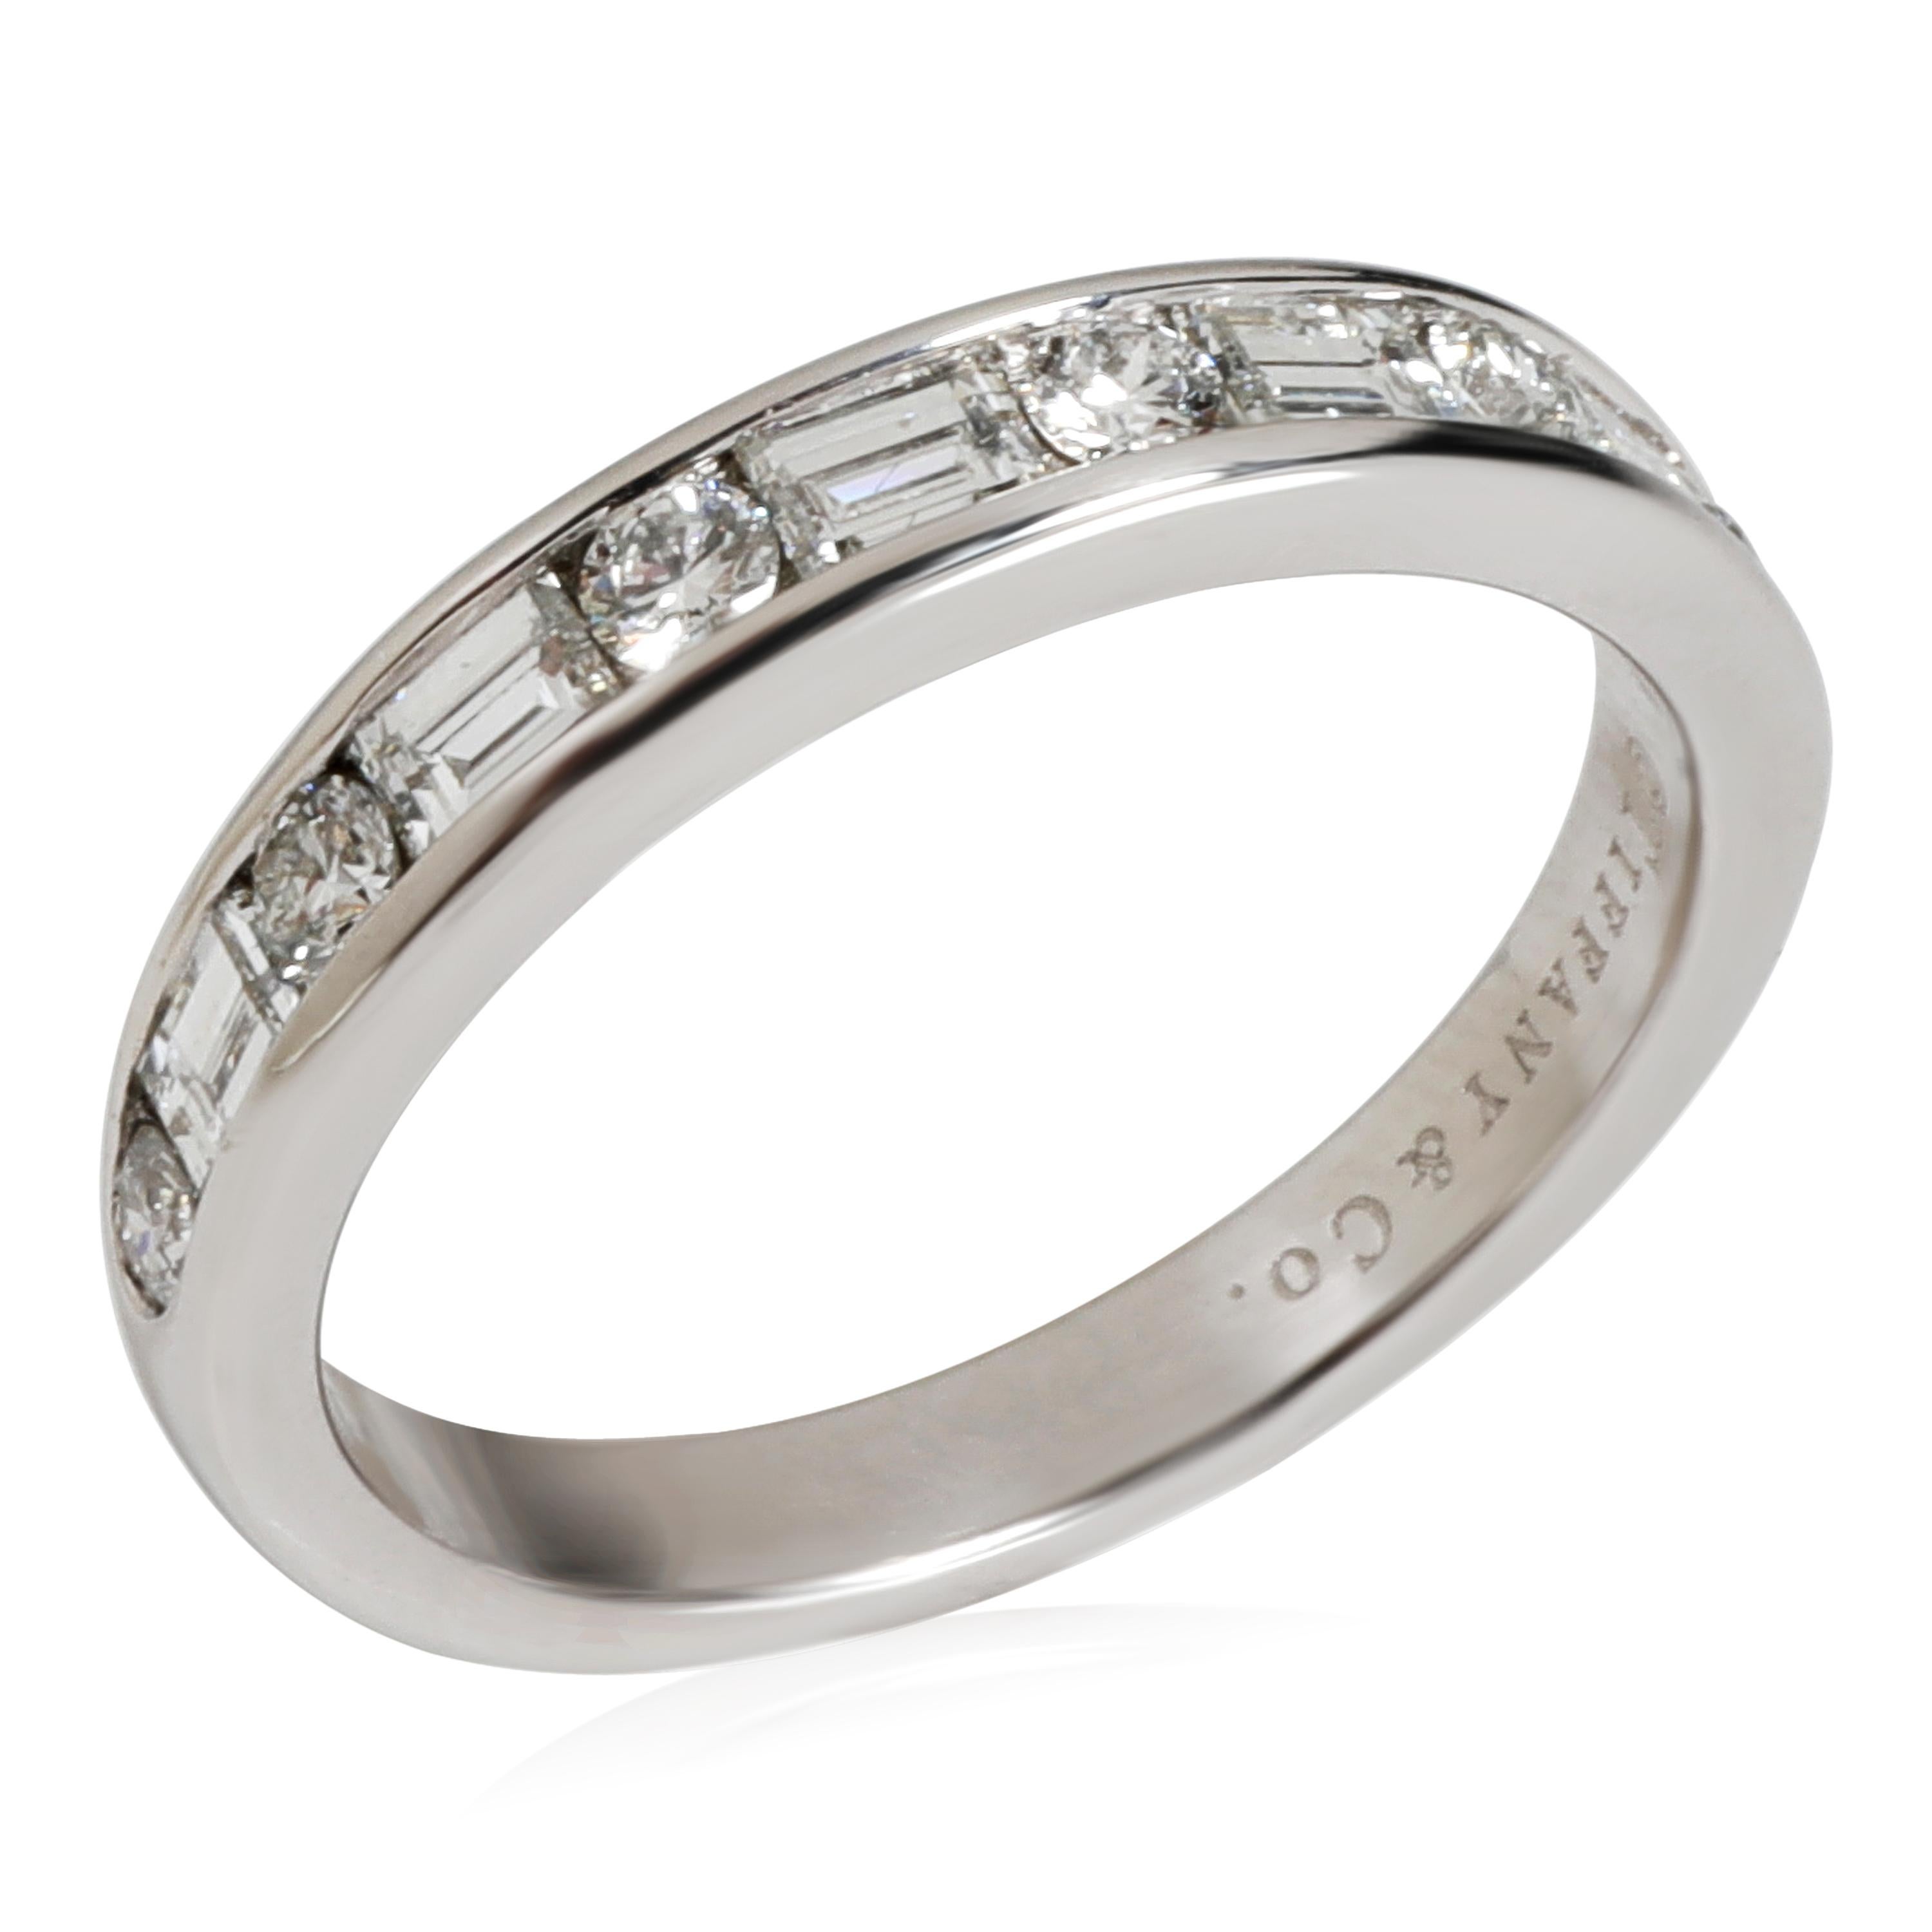 Tiffany & Co. Round & Baguette Diamond Wedding Band in Platinum 0.62 CTW

PRIMARY DETAILS
SKU: 117144
Listing Title: Tiffany & Co. Round & Baguette Diamond Wedding Band in Platinum 0.62 CTW
Condition Description: Retails for 4,100 USD. In excellent